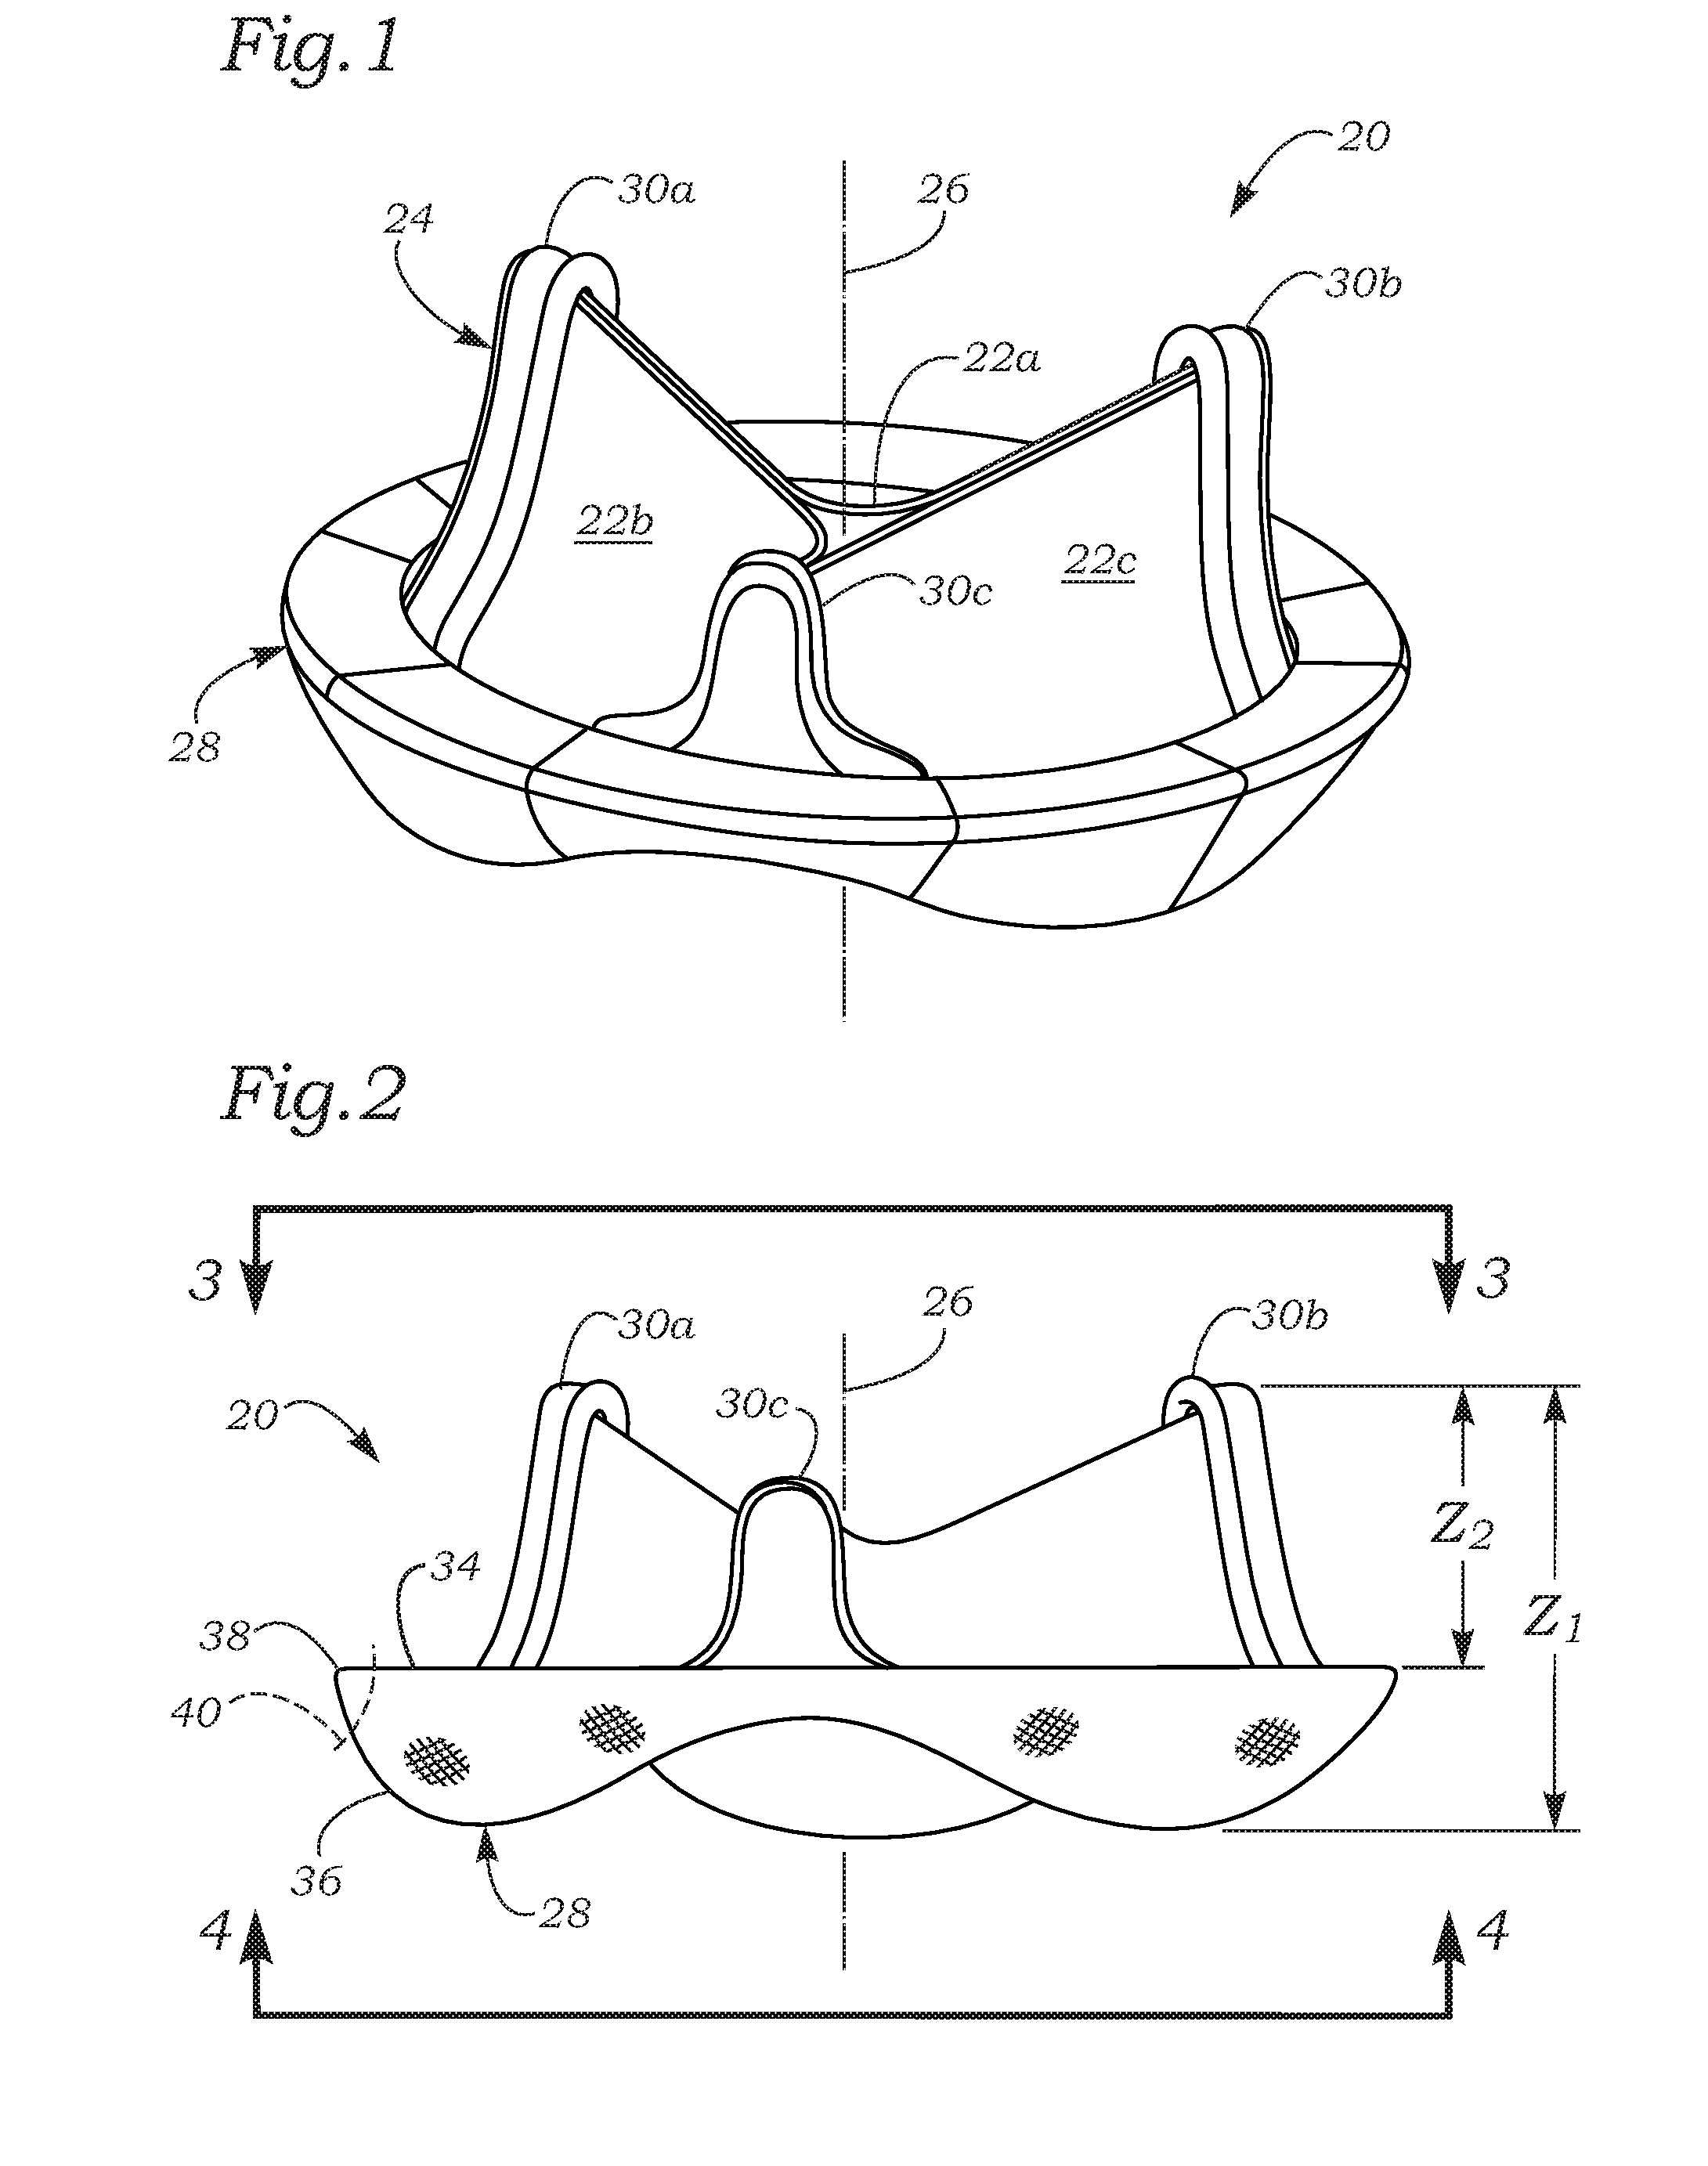 Anatomically Approximate Prosthetic Mitral Valve